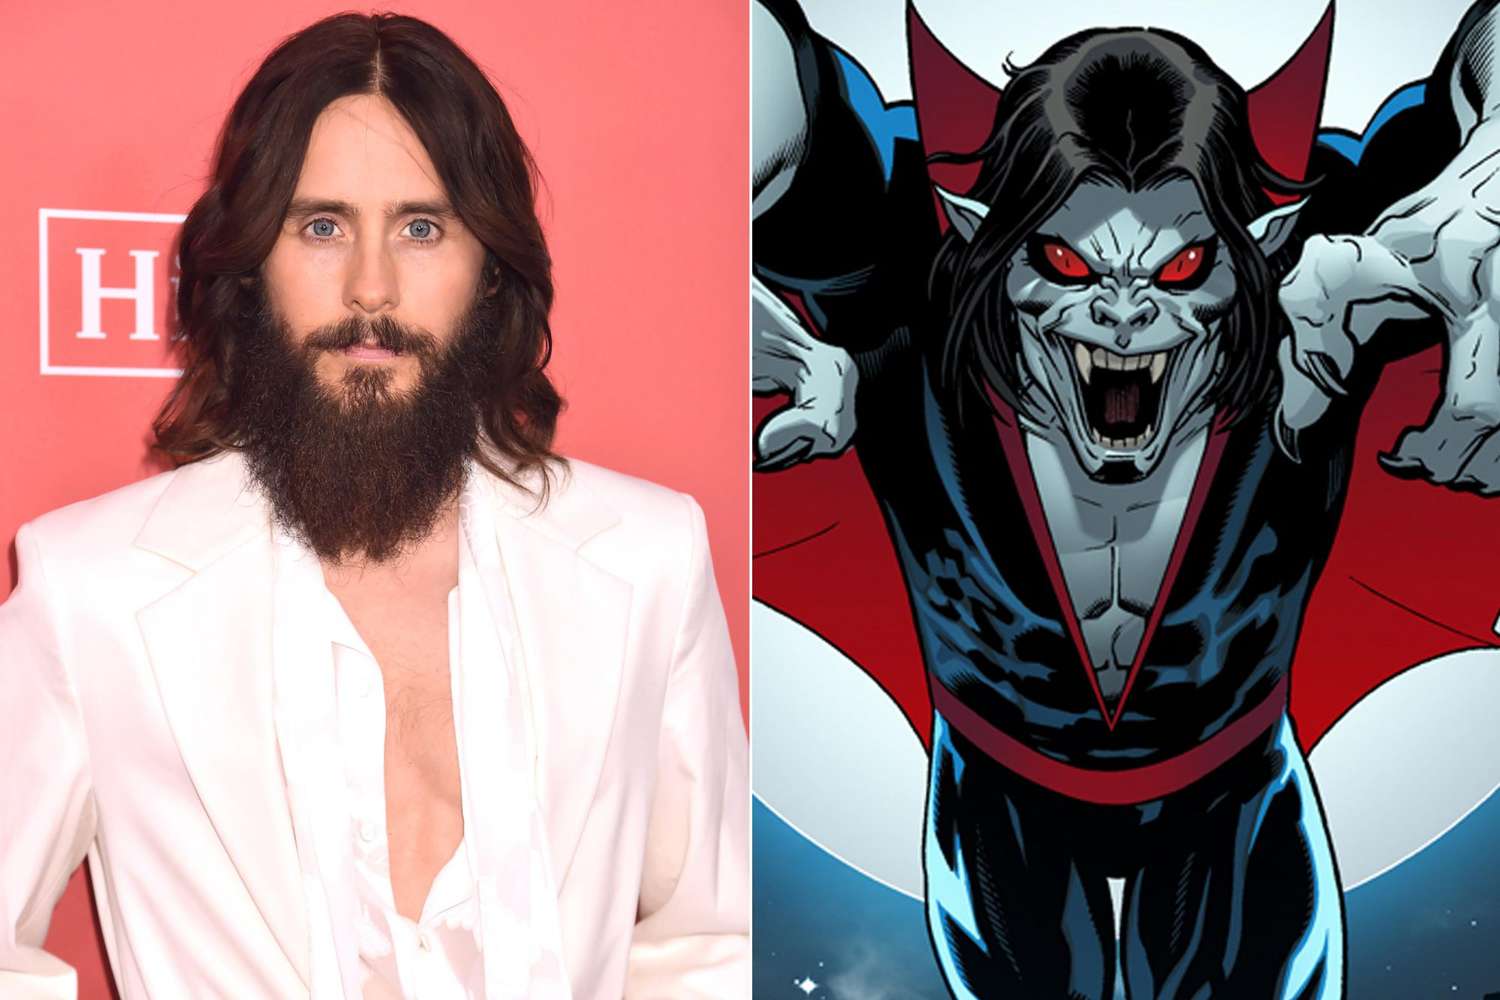 Where Can I Watch Morbius